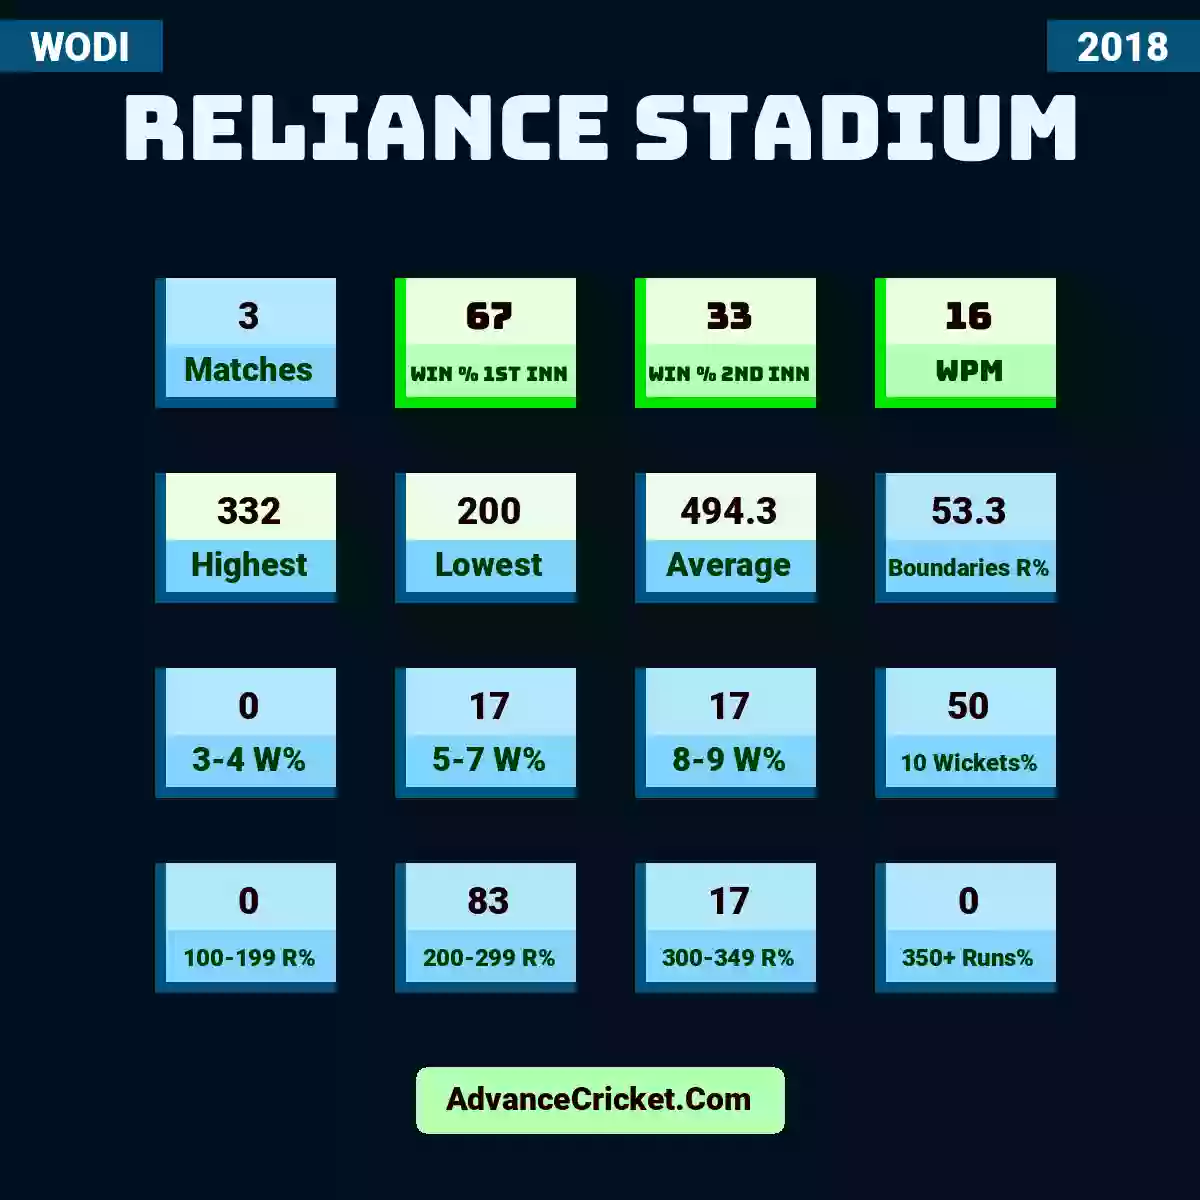 Image showing Reliance Stadium with Matches: 3, Win % 1st Inn: 67, Win % 2nd Inn: 33, WPM: 16, Highest: 332, Lowest: 200, Average: 494.3, Boundaries R%: 53.3, 3-4 W%: 0, 5-7 W%: 17, 8-9 W%: 17, 10 Wickets%: 50, 100-199 R%: 0, 200-299 R%: 83, 300-349 R%: 17, 350+ Runs%: 0.